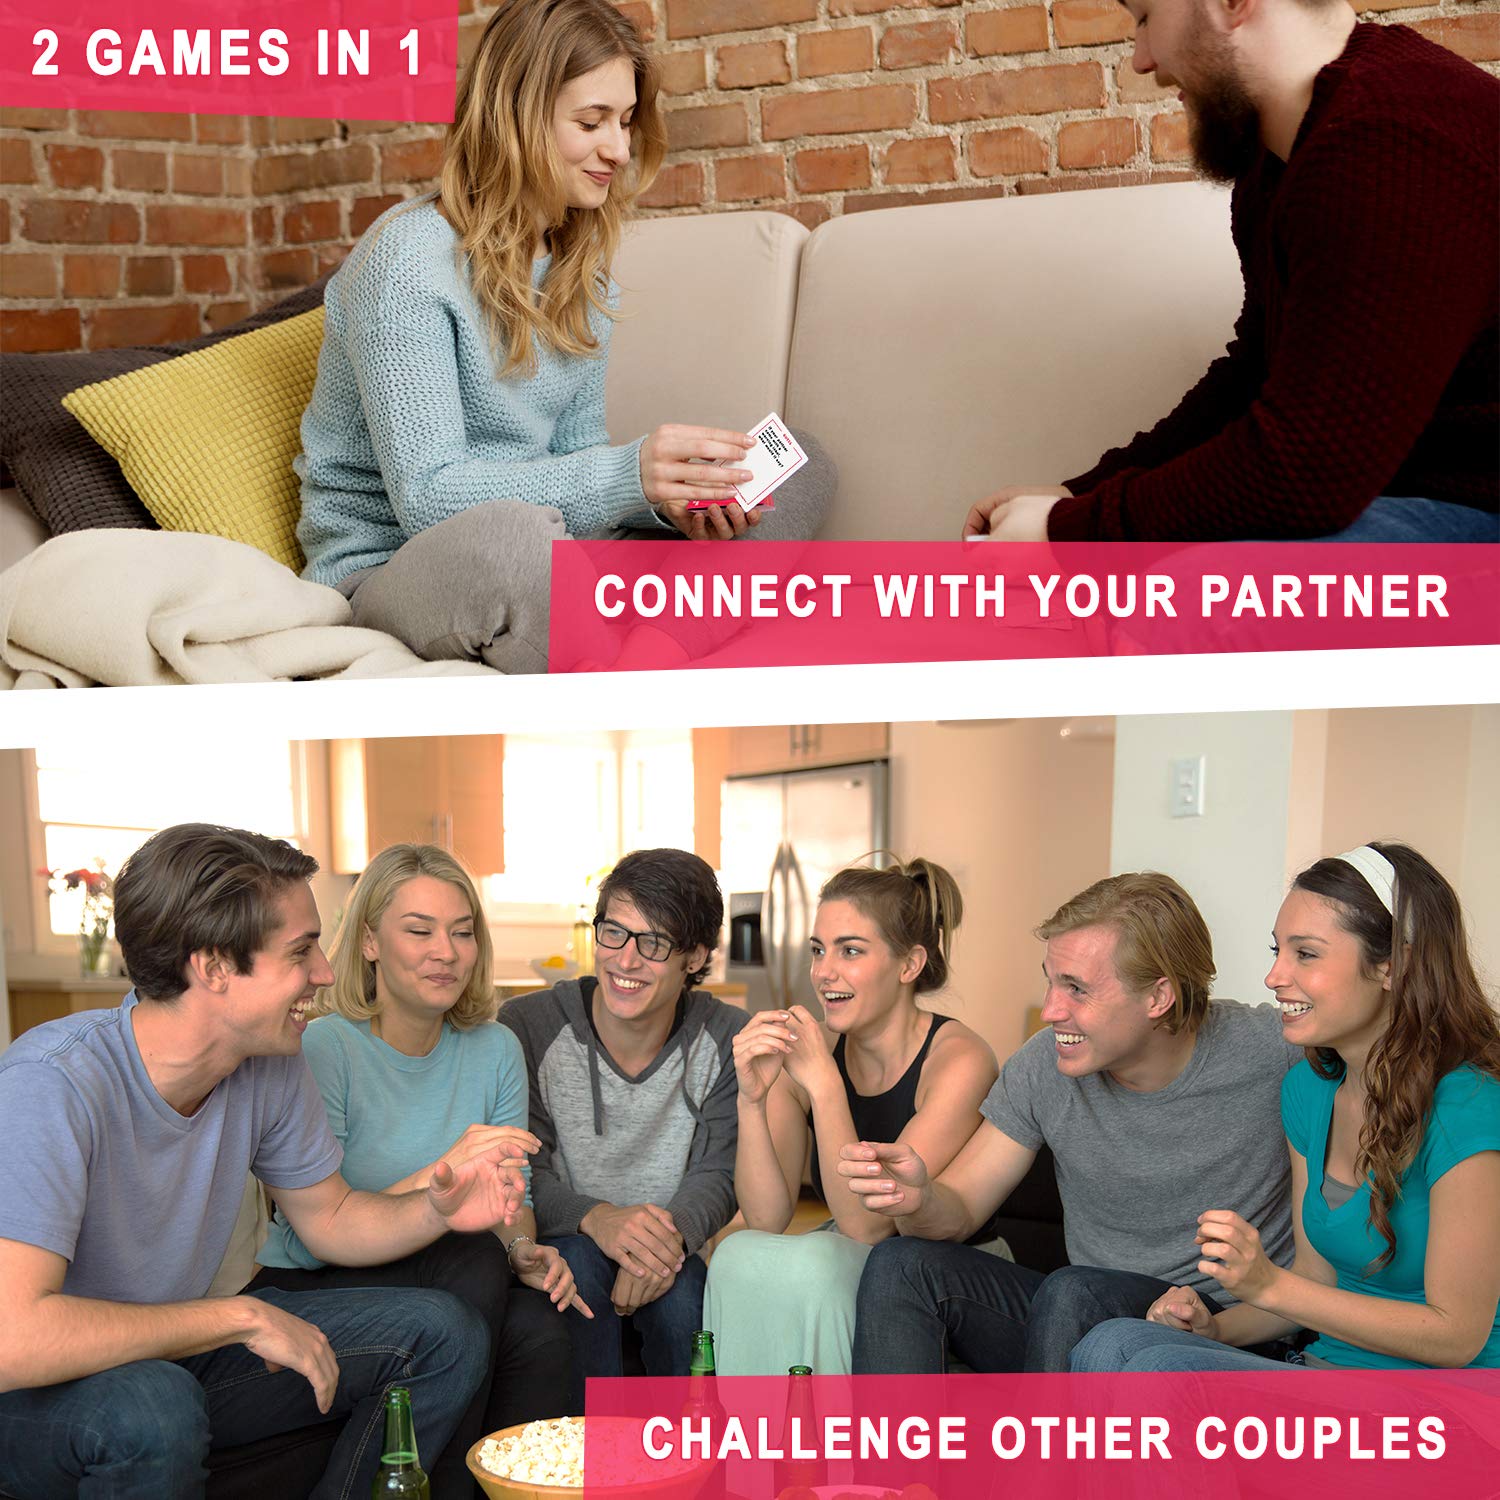 The Ultimate Game for Couples - Great Conversations and Fun Challenges for Date Night - Perfect Romantic Gift for Couples